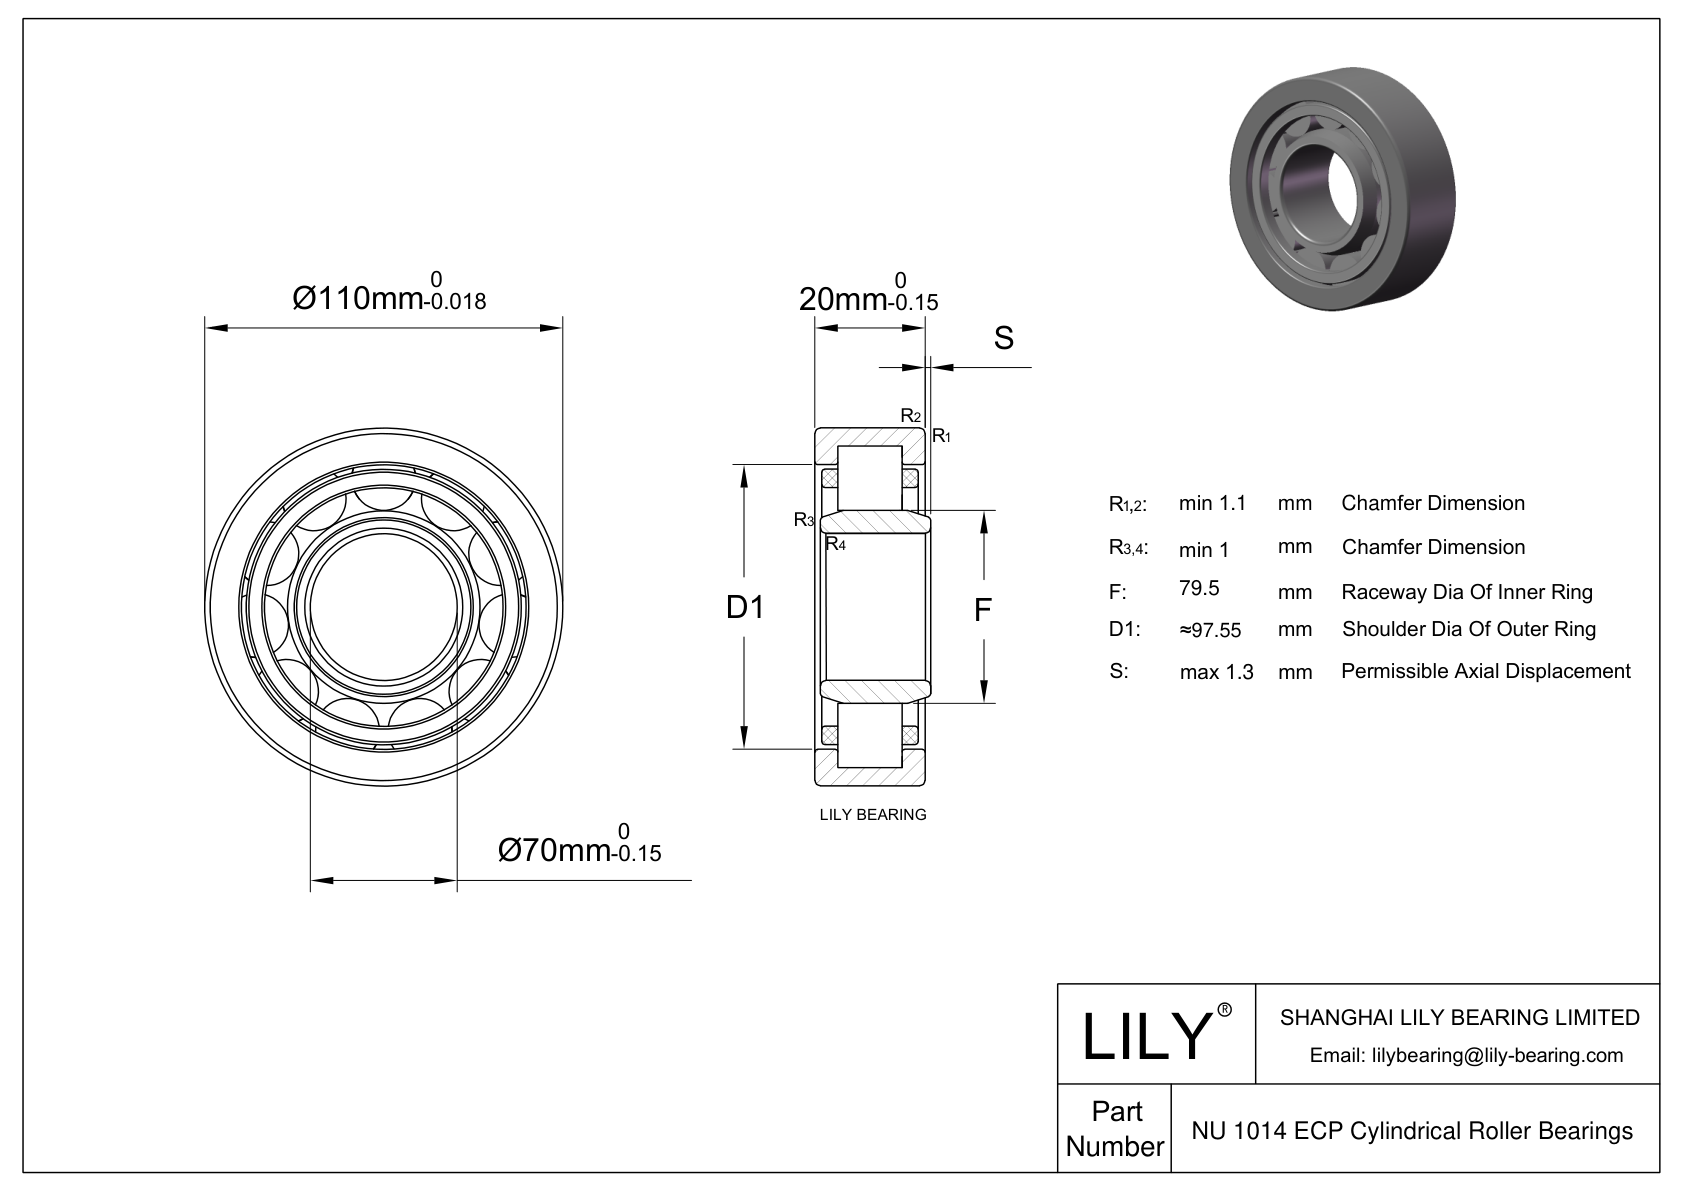 NU 1014 ECM/C3VL0241 Ceramic Coated Cylindrical Roller Bearings cad drawing